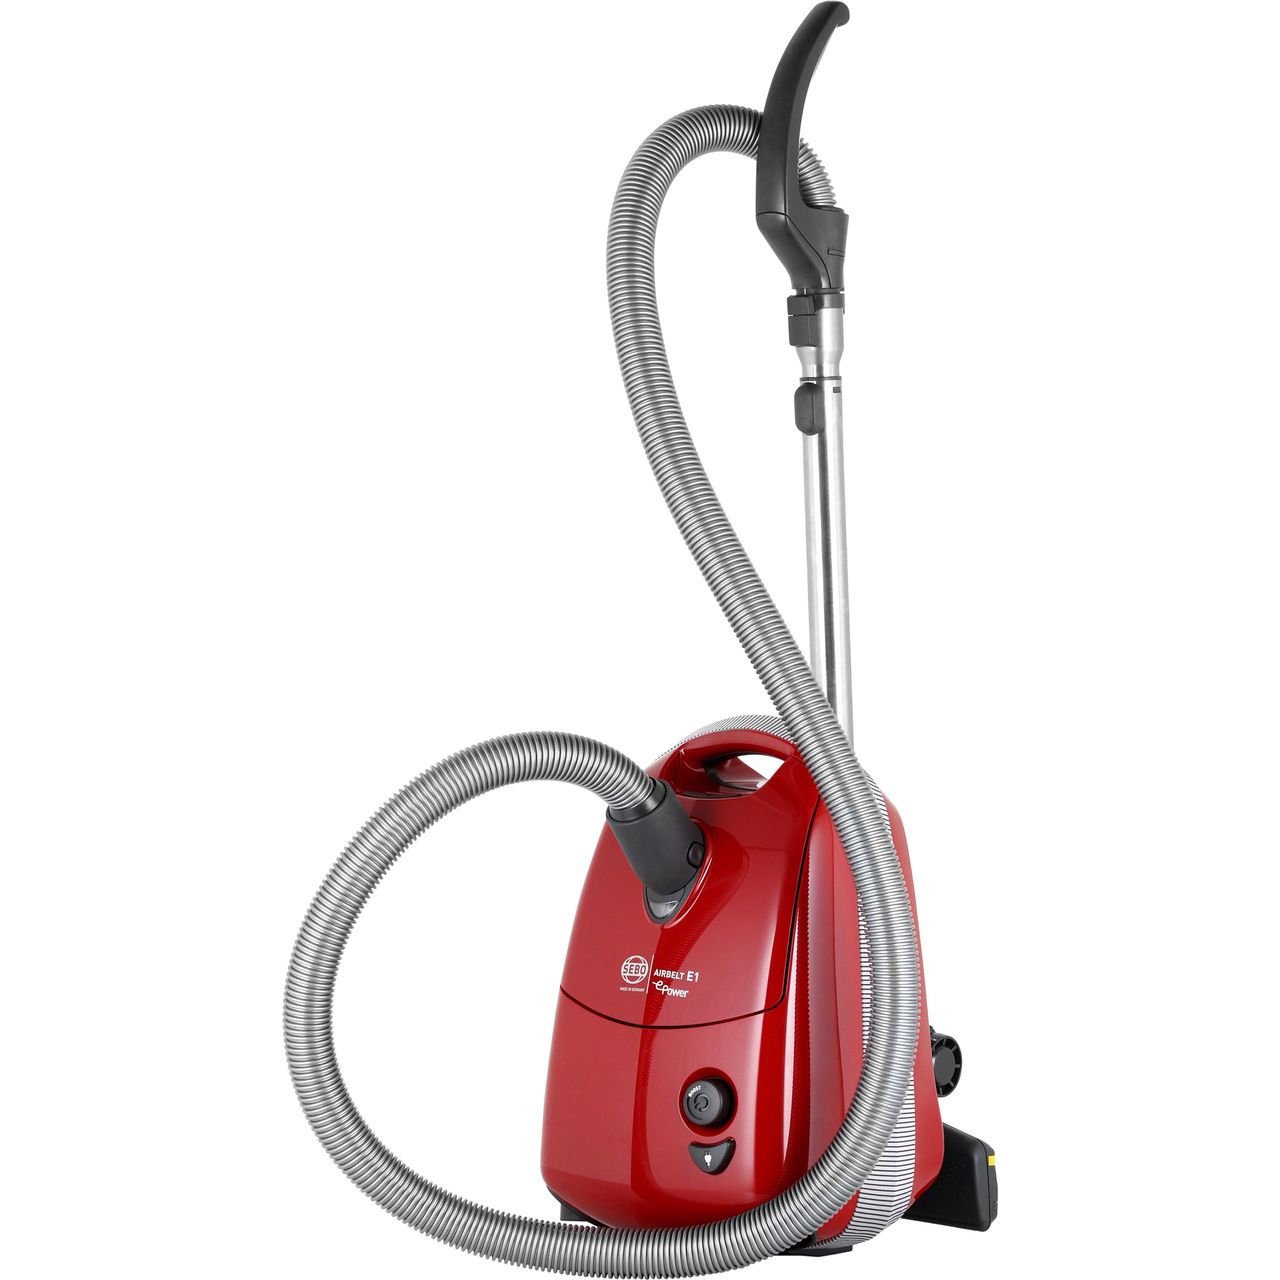 Sebo Airbelt E1 ePower 92623GB Cylinder Vacuum Cleaner Review